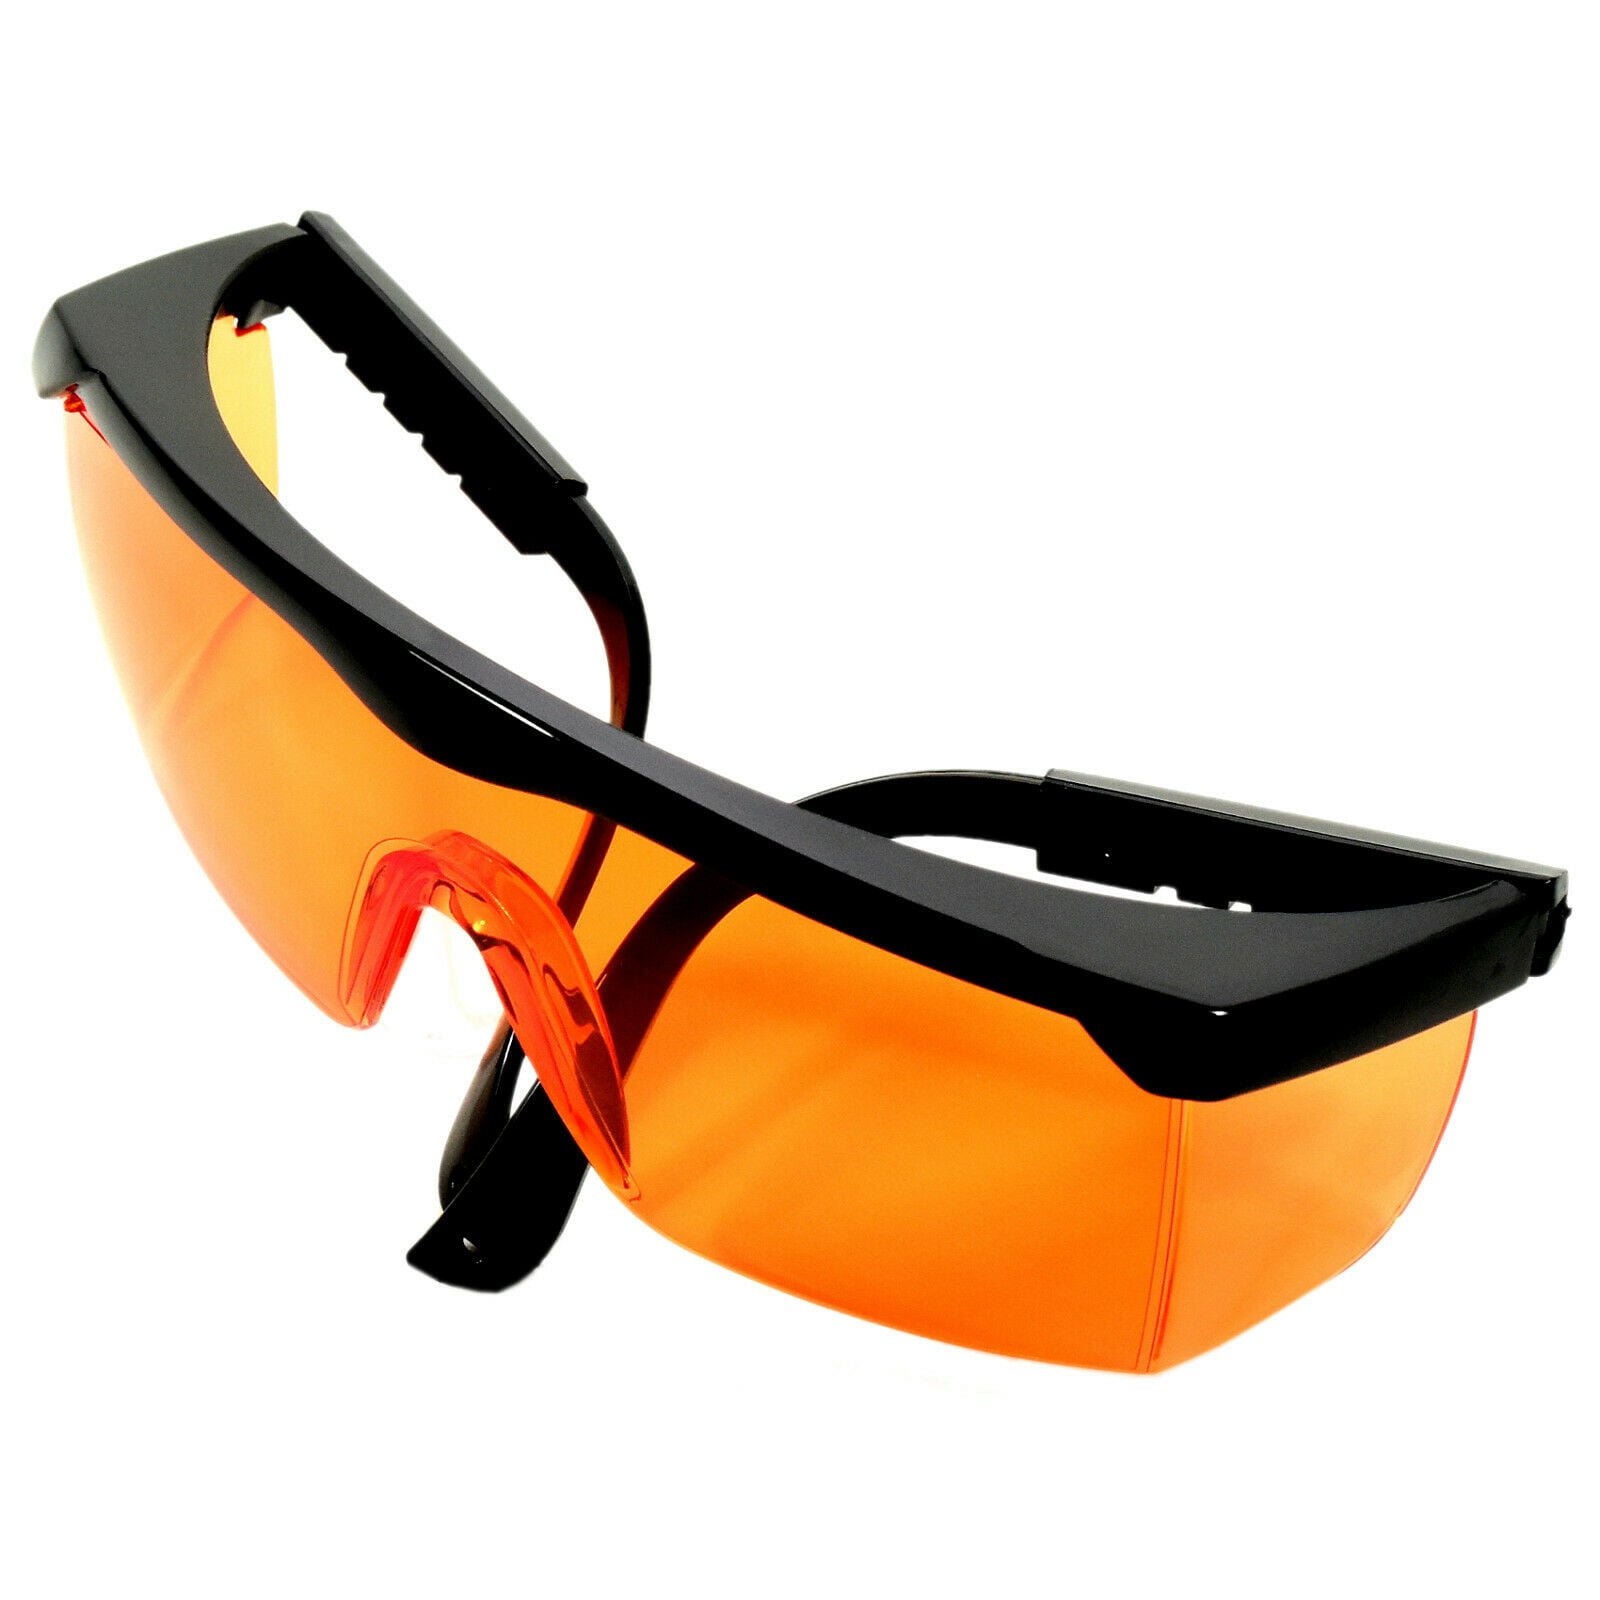 Details about   Hunting Cycling Safety Glasses Shooting Range Eye Protection Outdoor Eyewear 